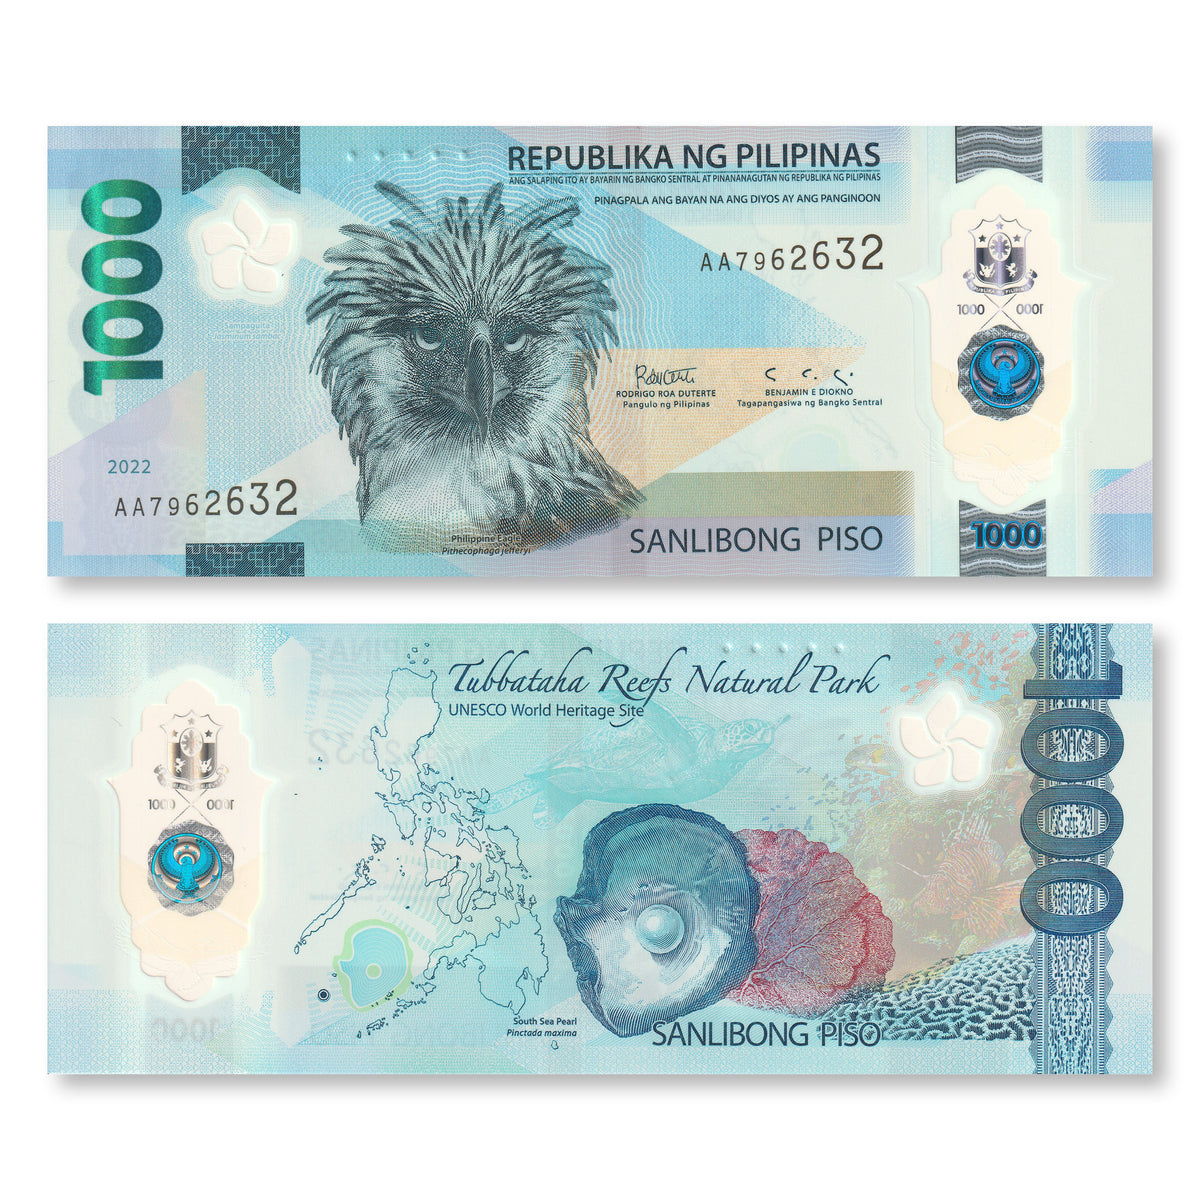 Philippines 1000 Piso, 2022, B1100a, IBNS Banknote of the Year 2022, UNC